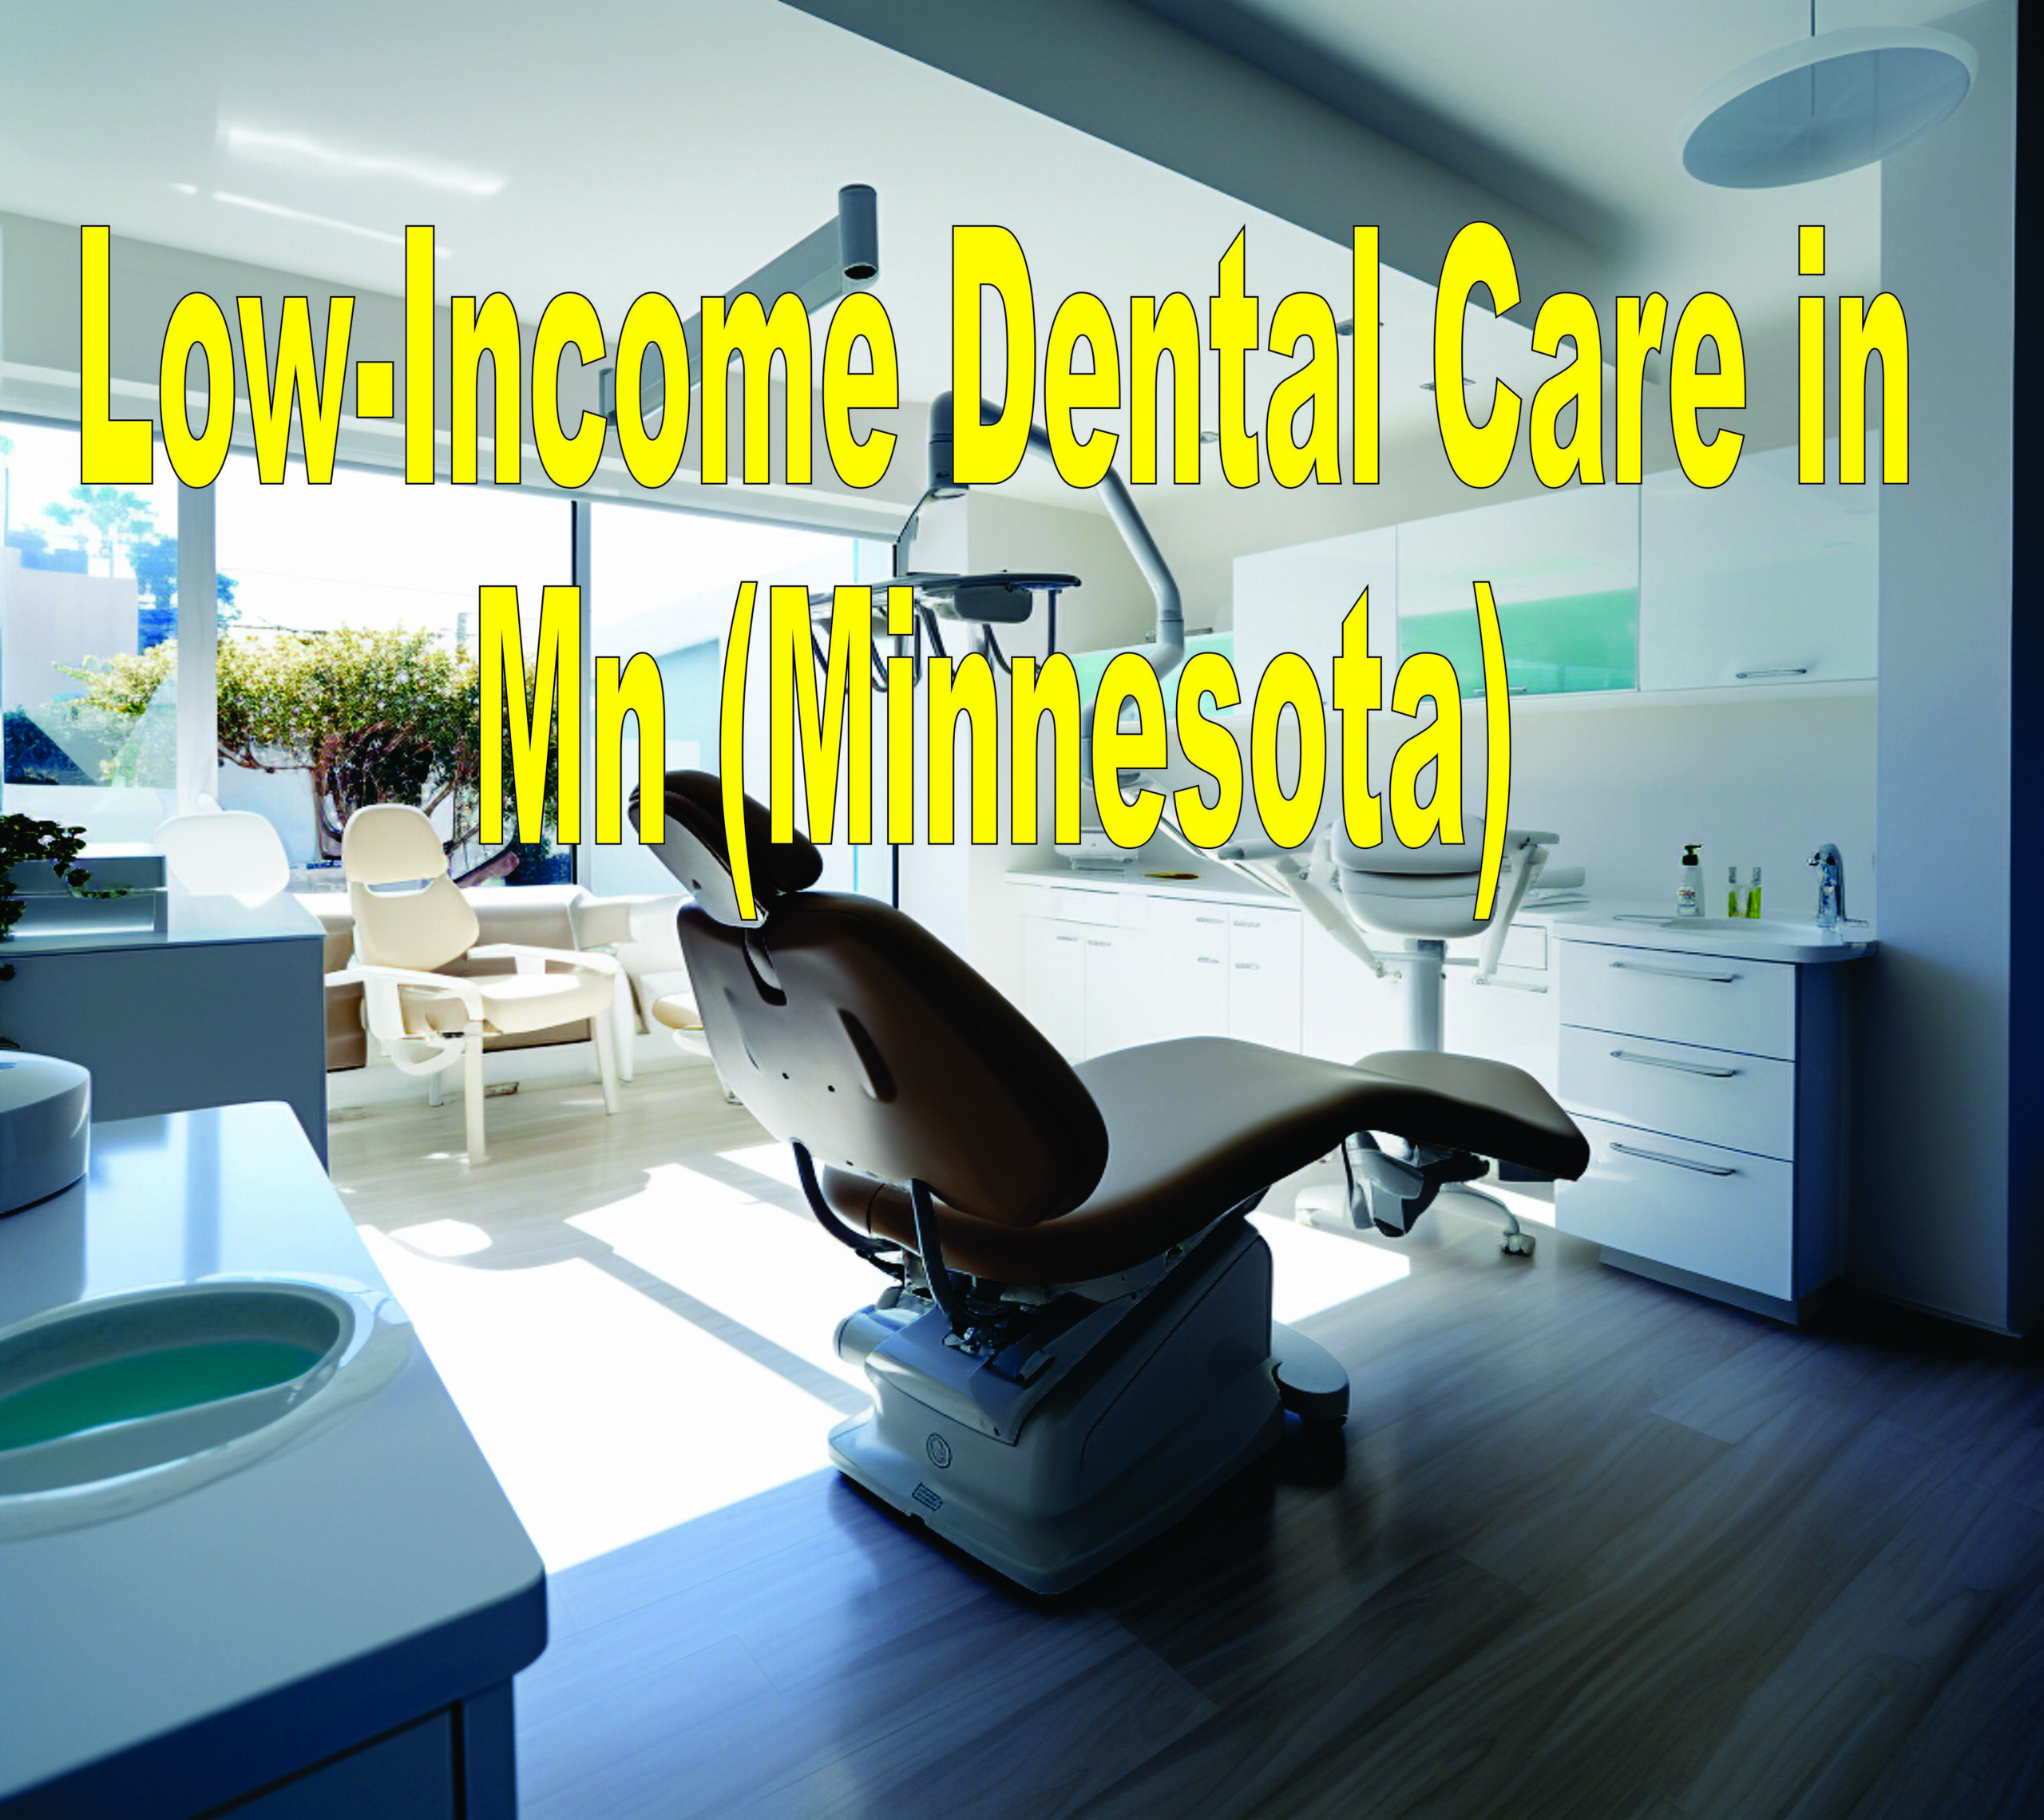 Low Income Dental Care In Mn (minnesota)